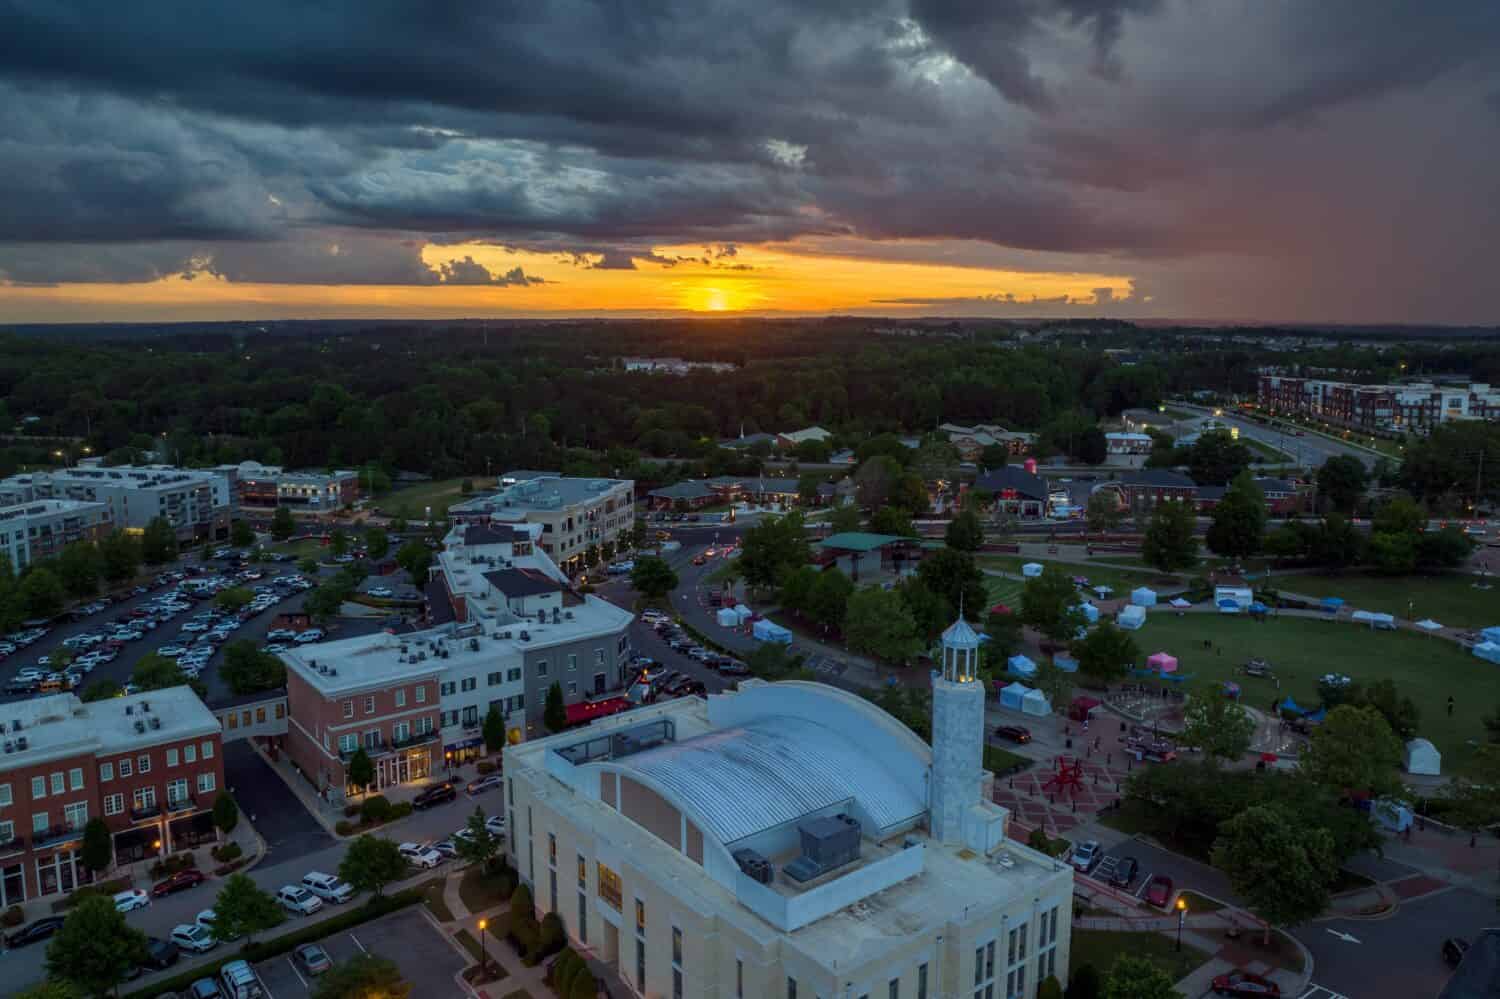 Suwanee town center at sunset with a storm approaching